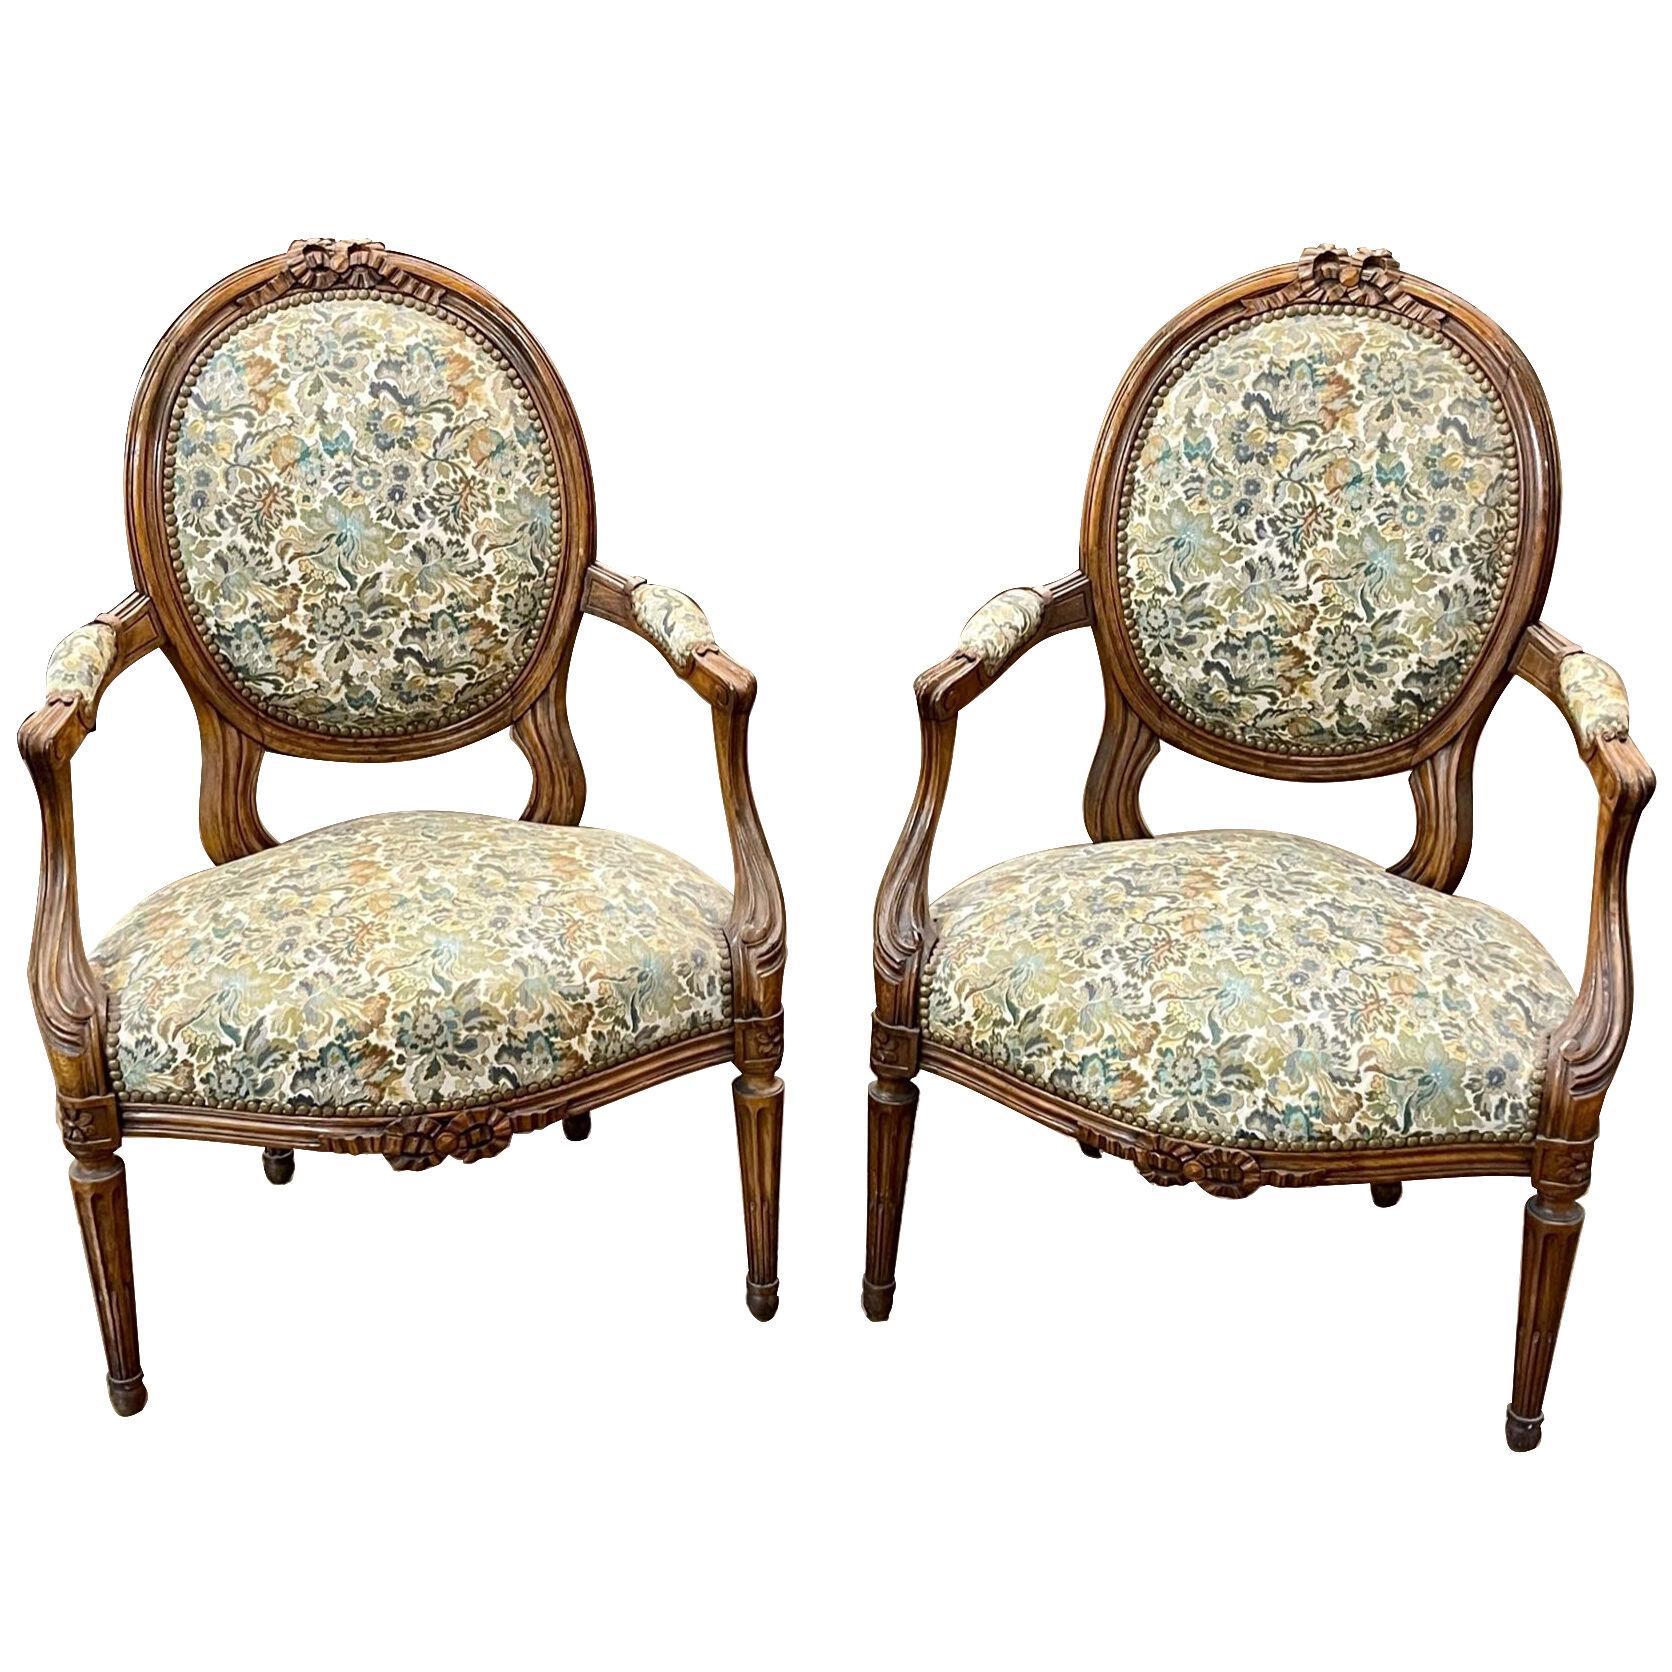 Pair of 19th Century French Provincial Carved Walnut Chairs